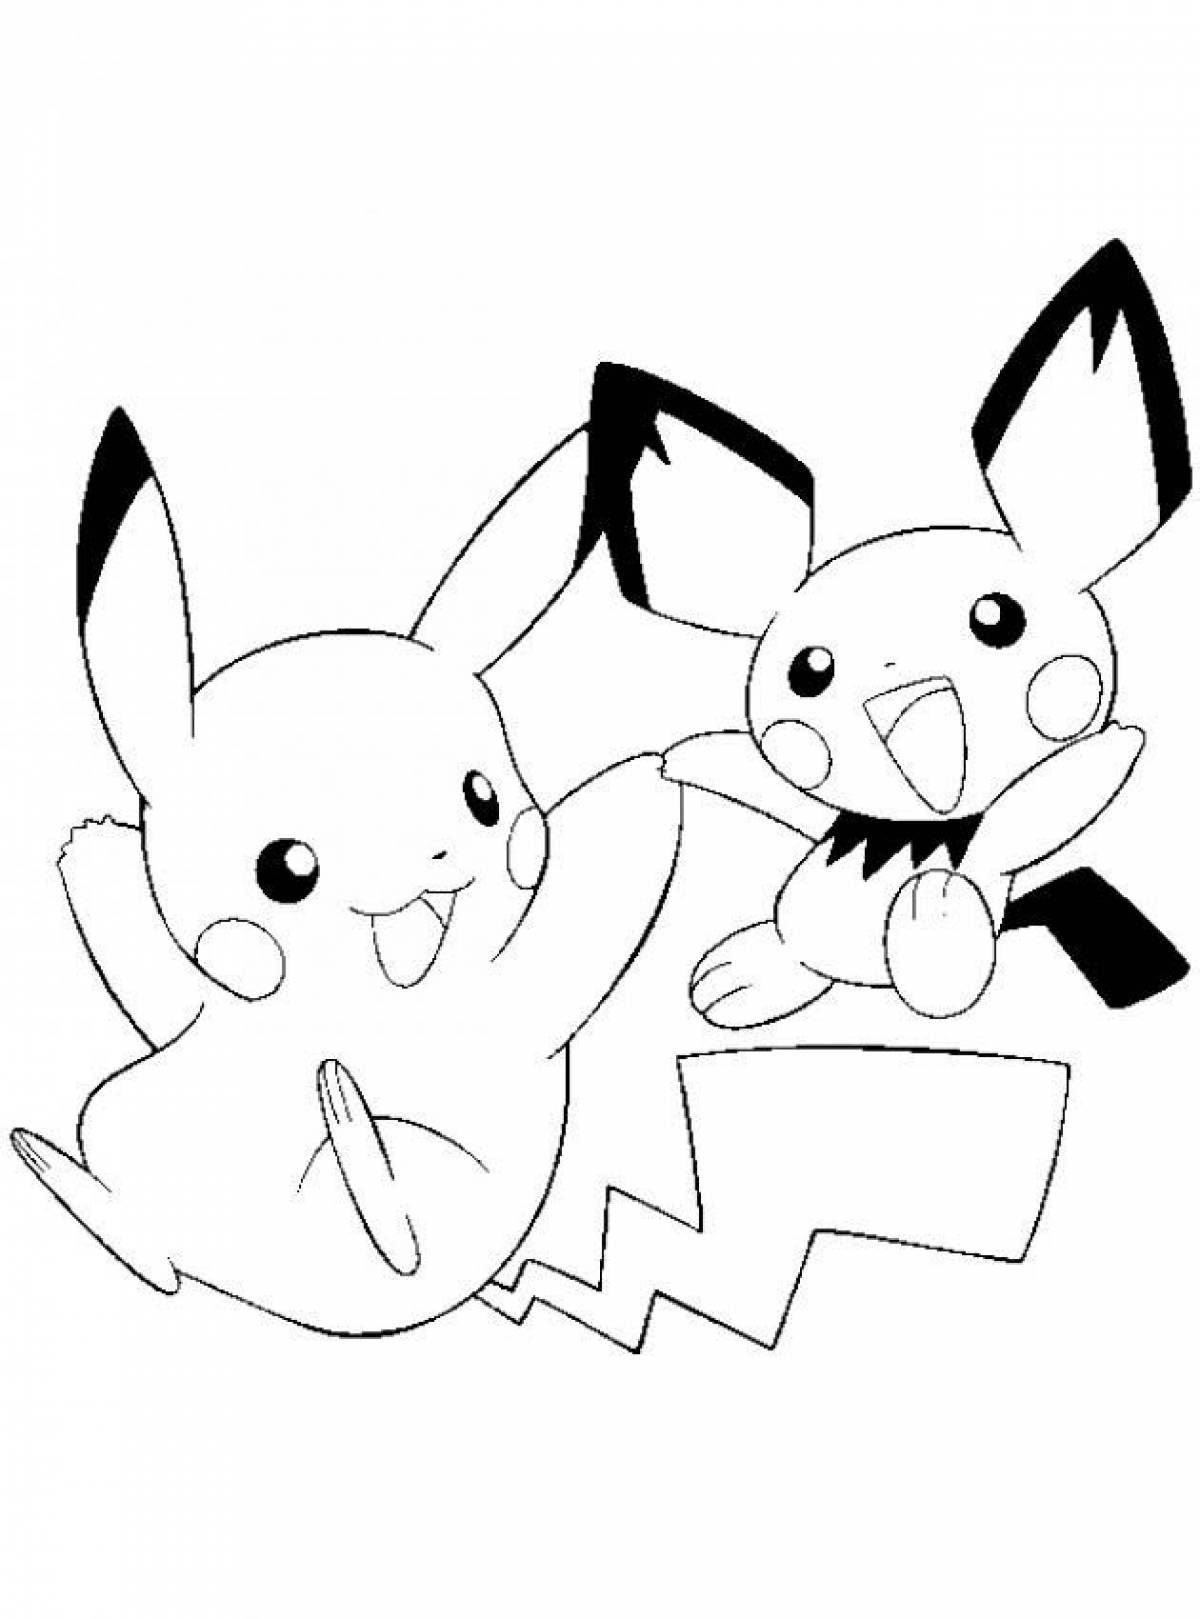 Pikachu and other Pokemon